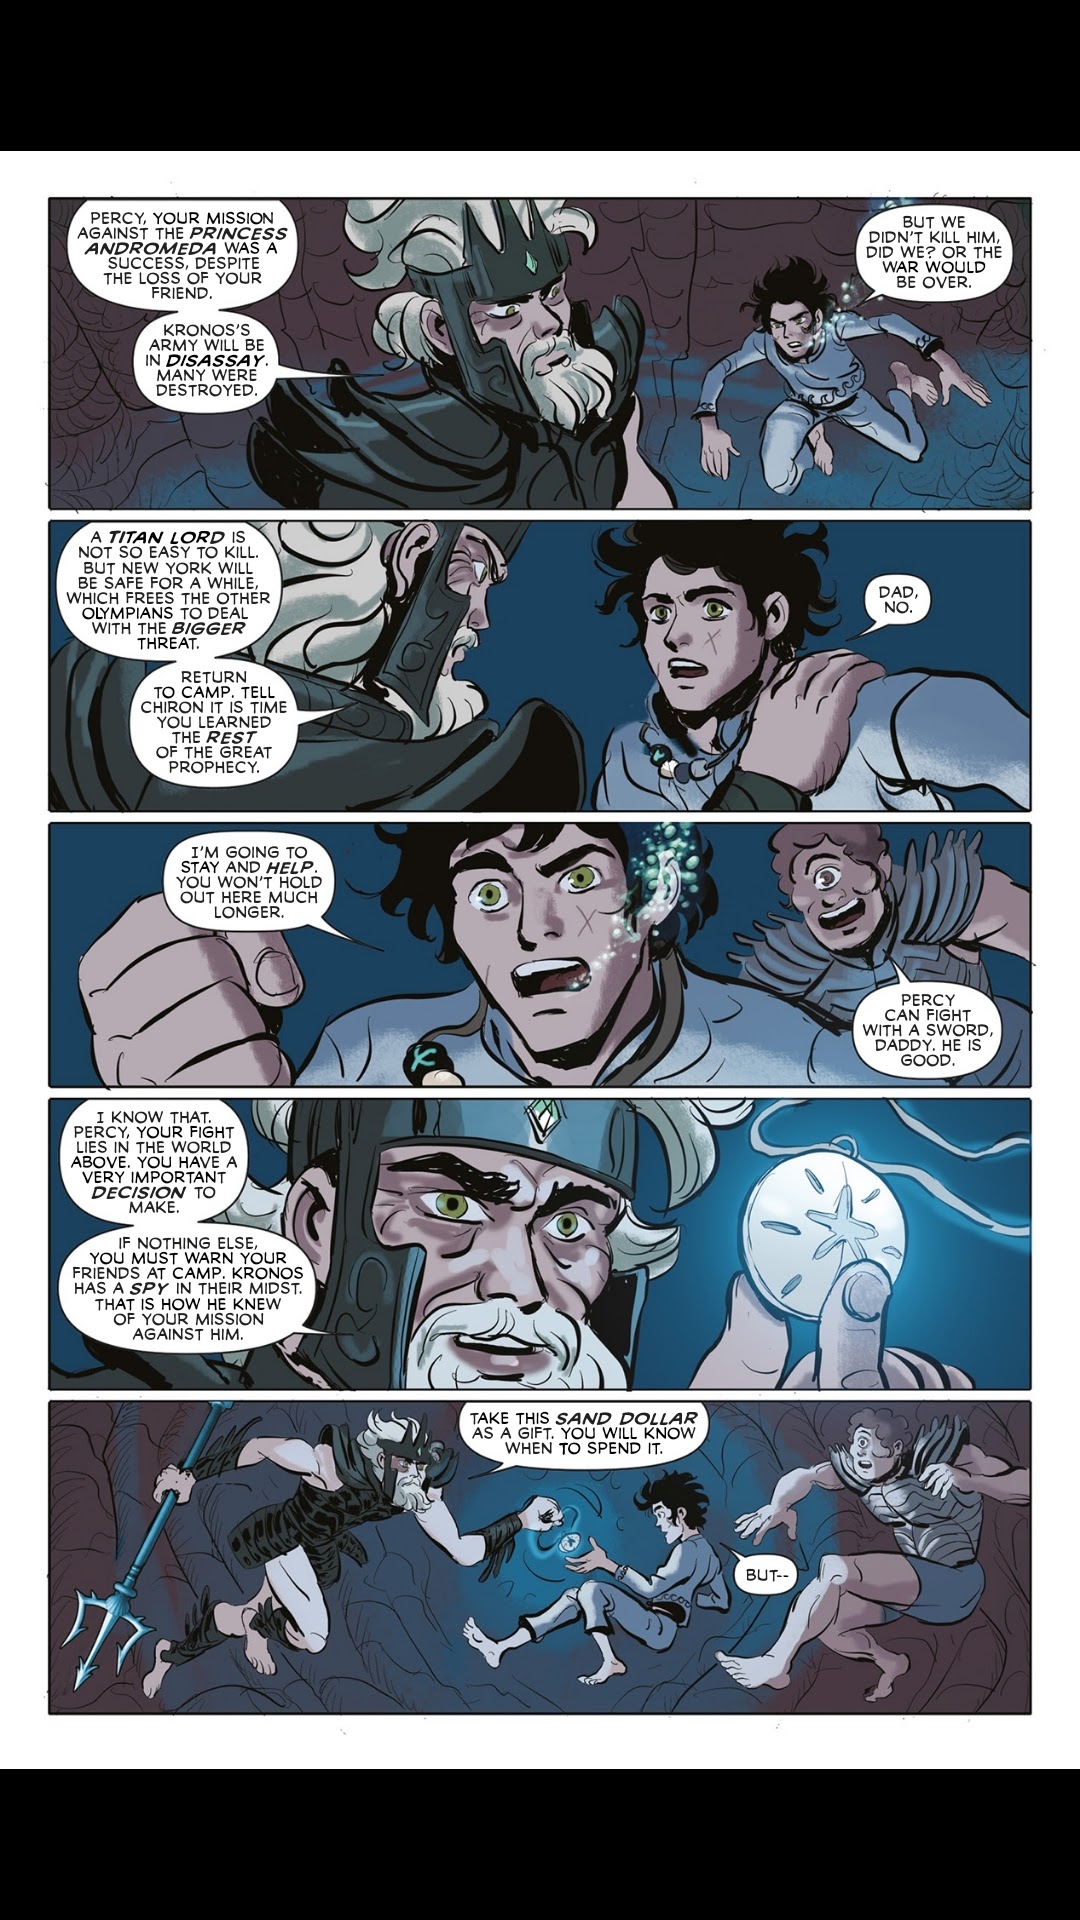 Read online Percy Jackson and the Olympians comic -  Issue # TPB 5 - 12